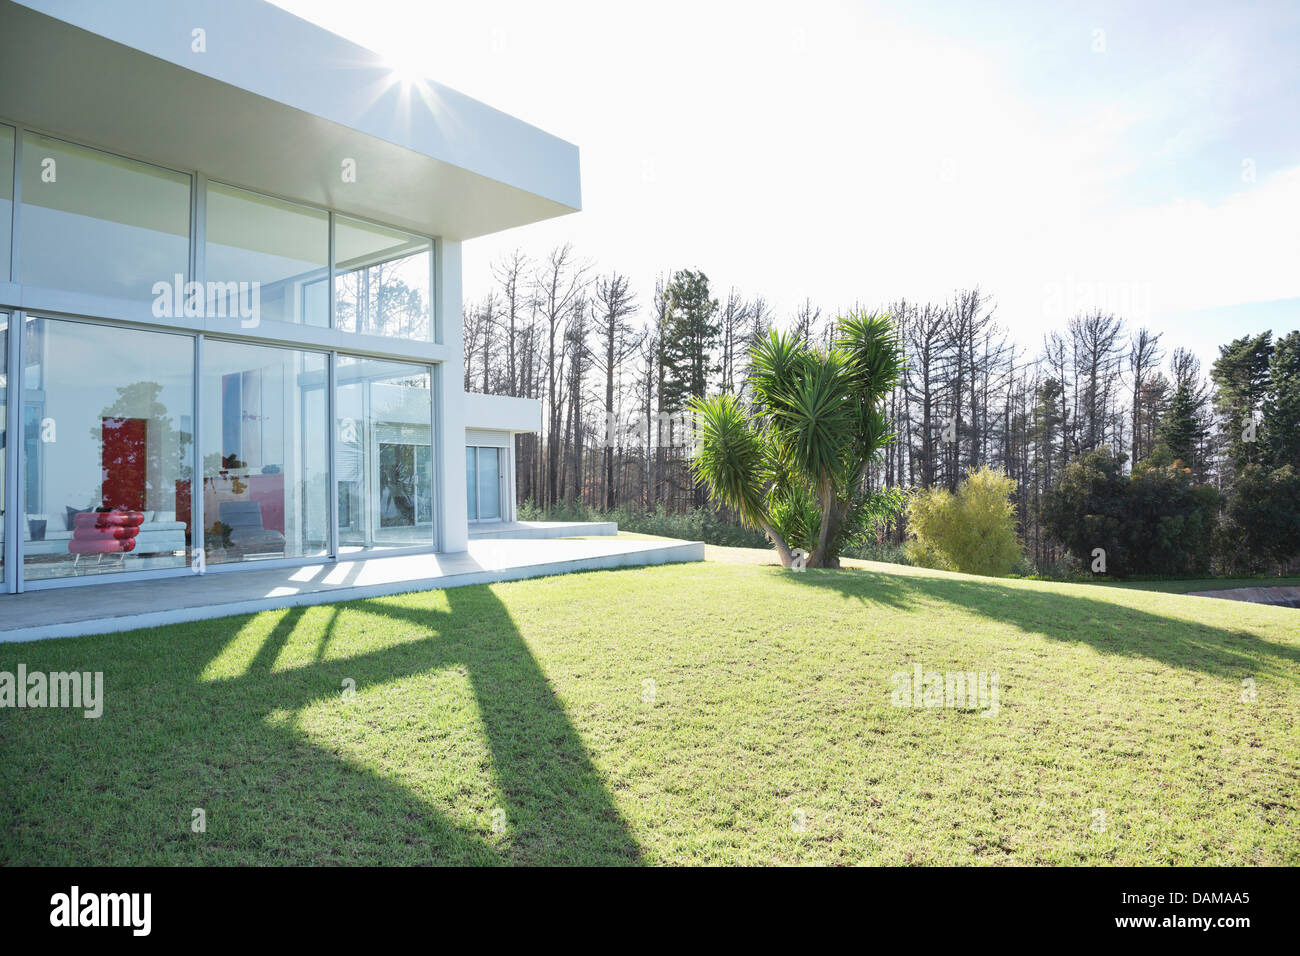 Modern house casting shadows on manicured lawn Stock Photo